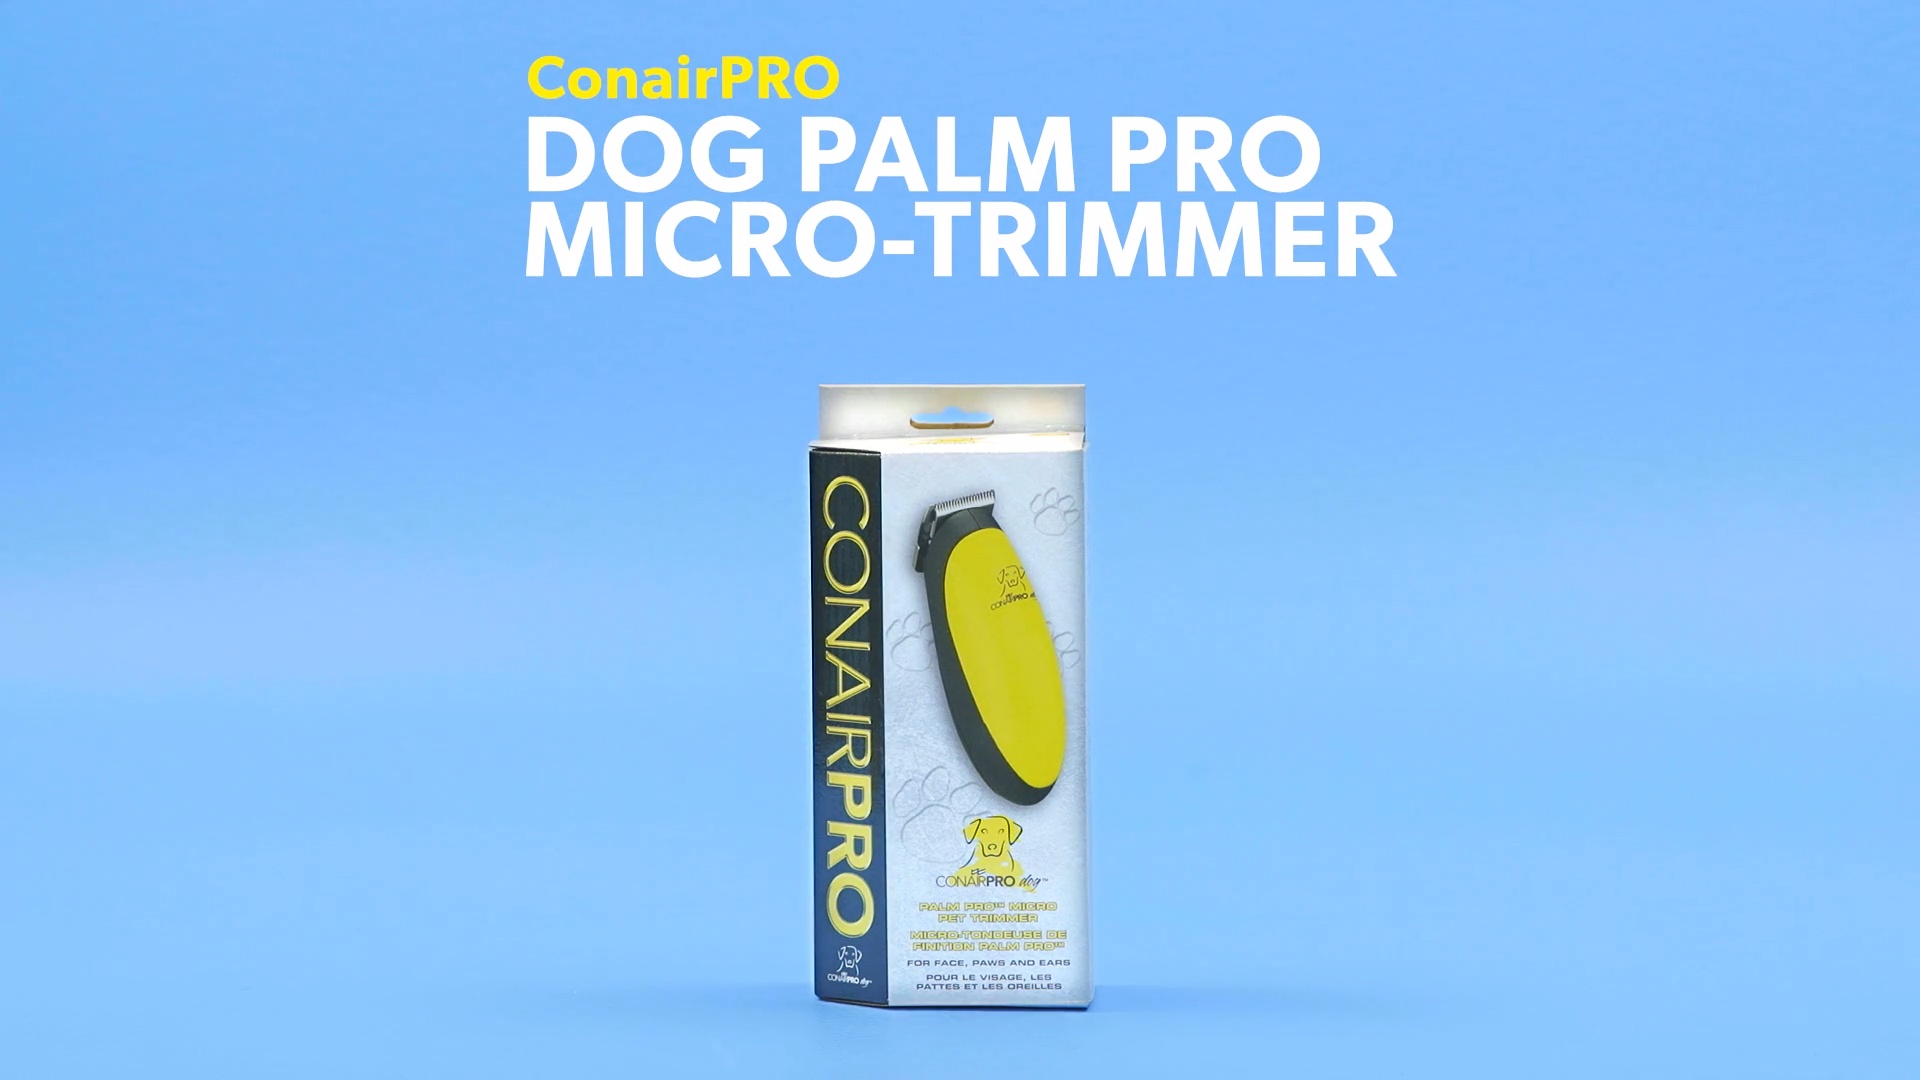 top paw by conair palm pro micro pet trimmer